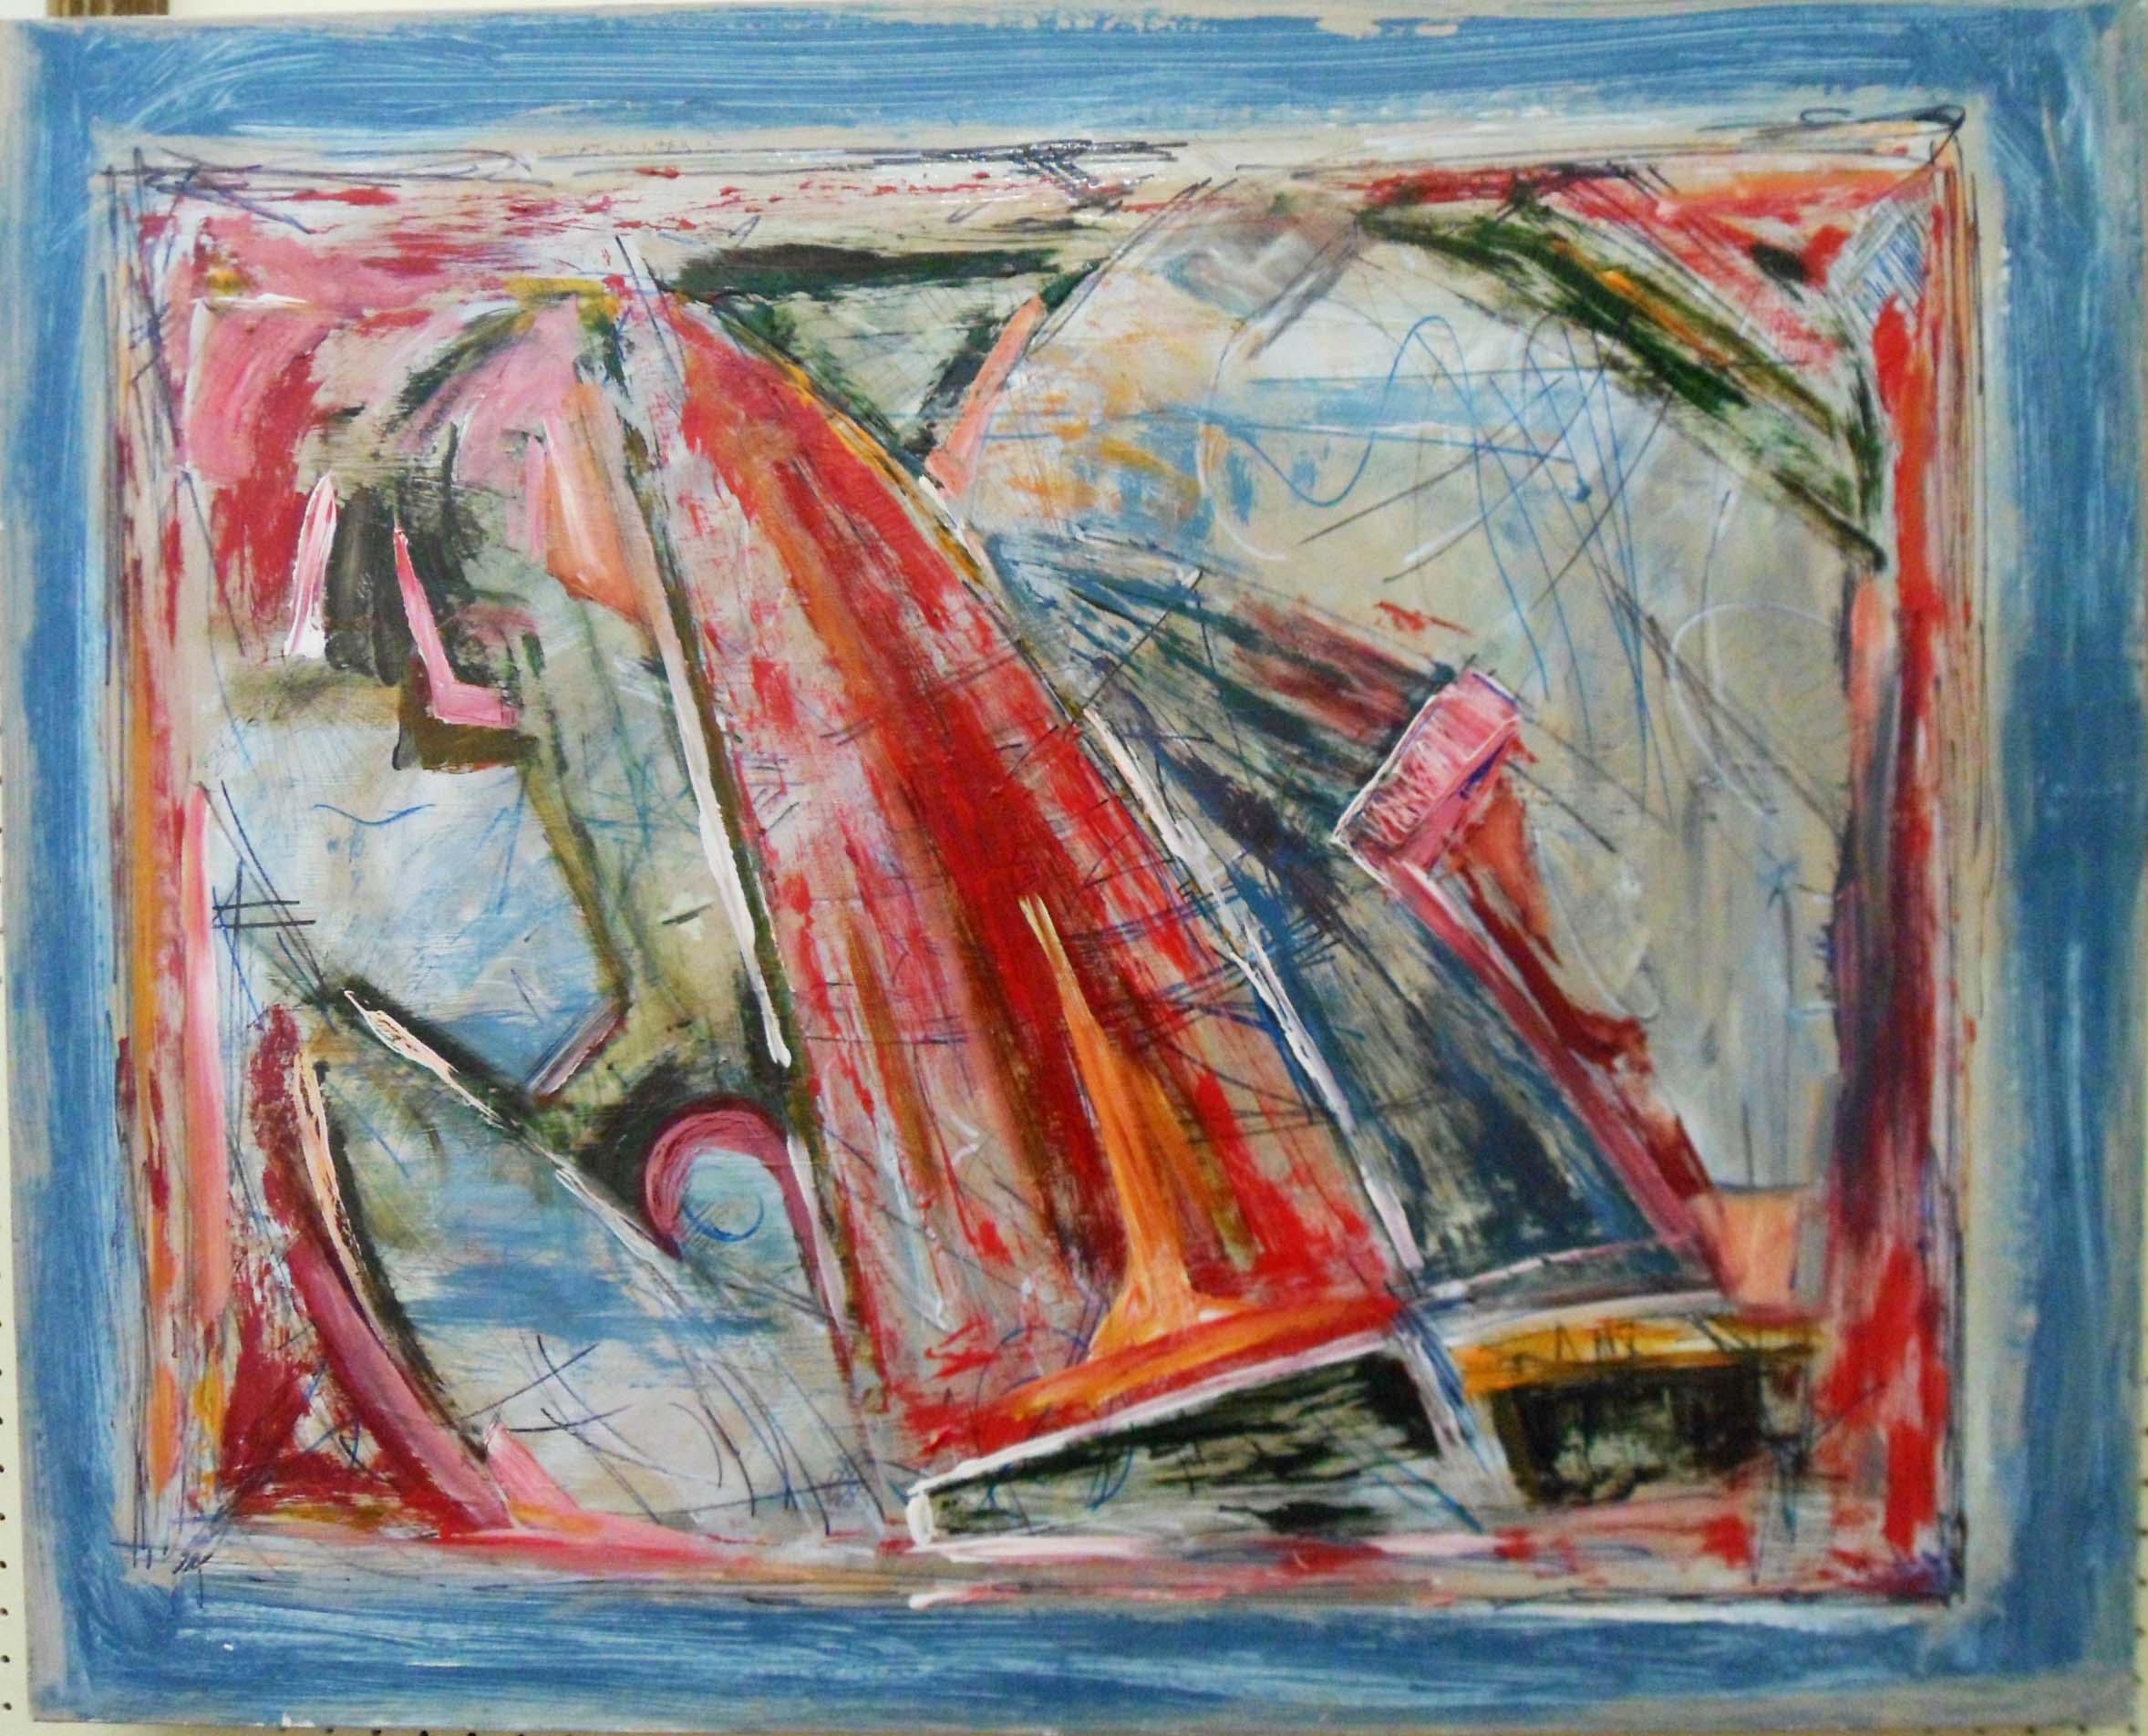 A modern mixed media painting depicting an abstract seascape with sailing boat